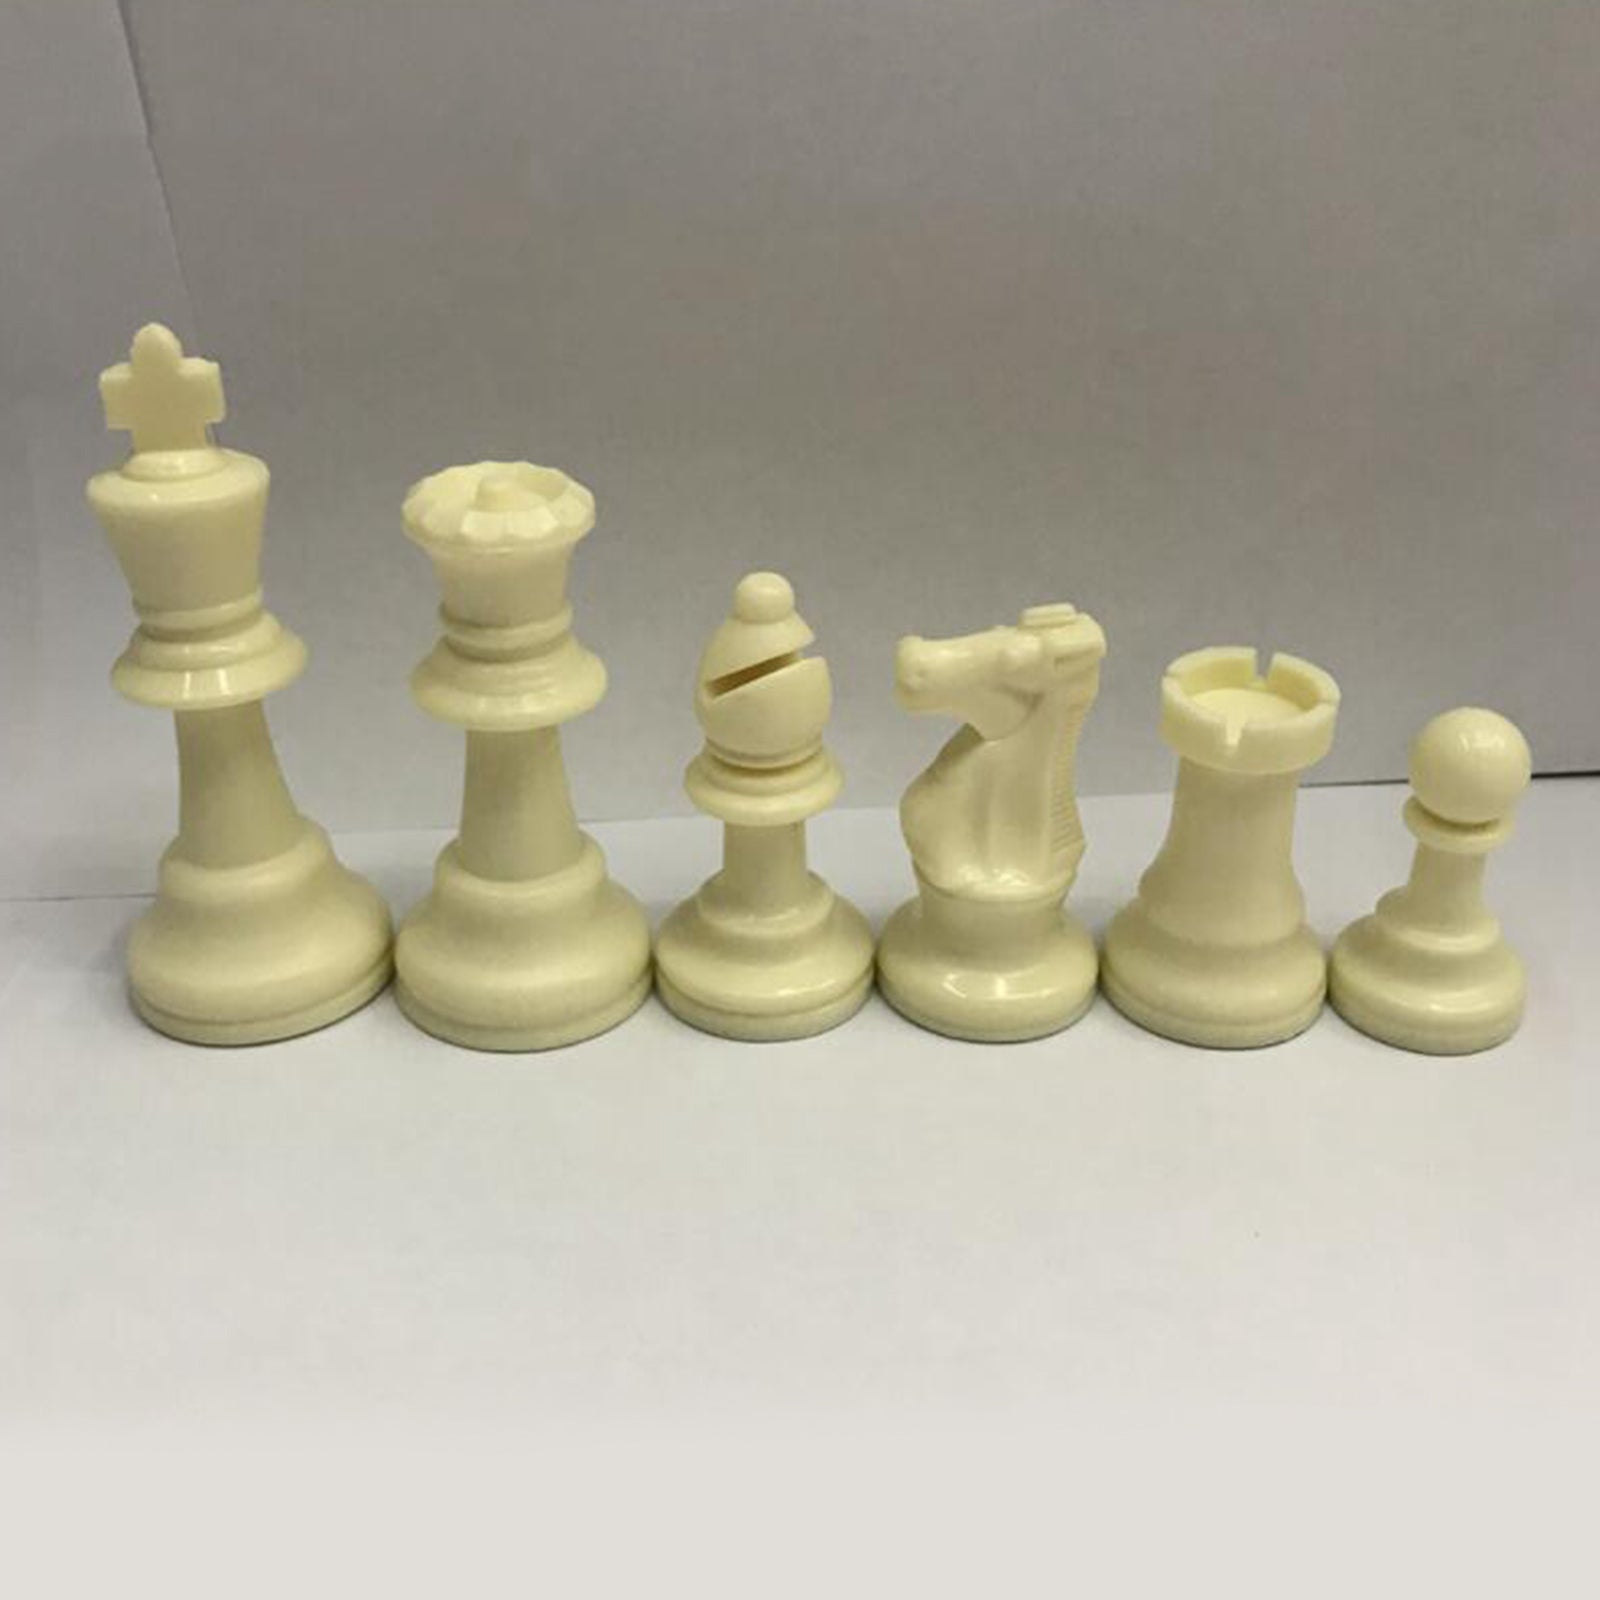 Standard Chess Pieces Set Board Game 64mm King for Adult Children No Board